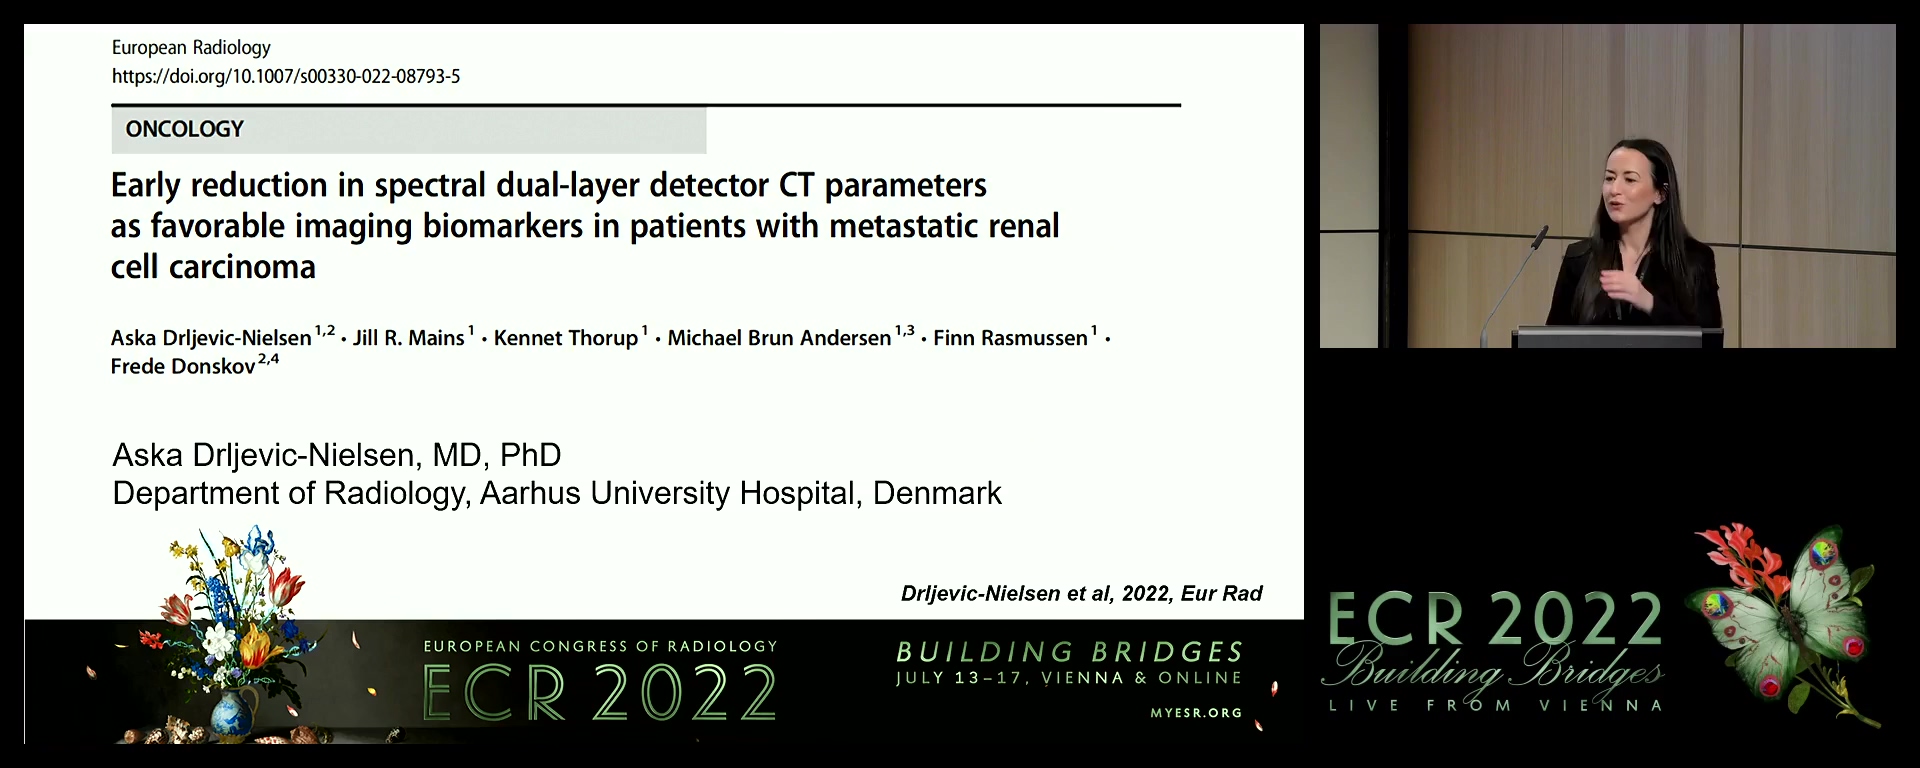 Early reduction in spectral dual-layer detector CT parameters as favourable imaging biomarkers in patients with metastatic renal cell carcinoma - Aska Drljevic-Nielsen, Aarhus N / DK